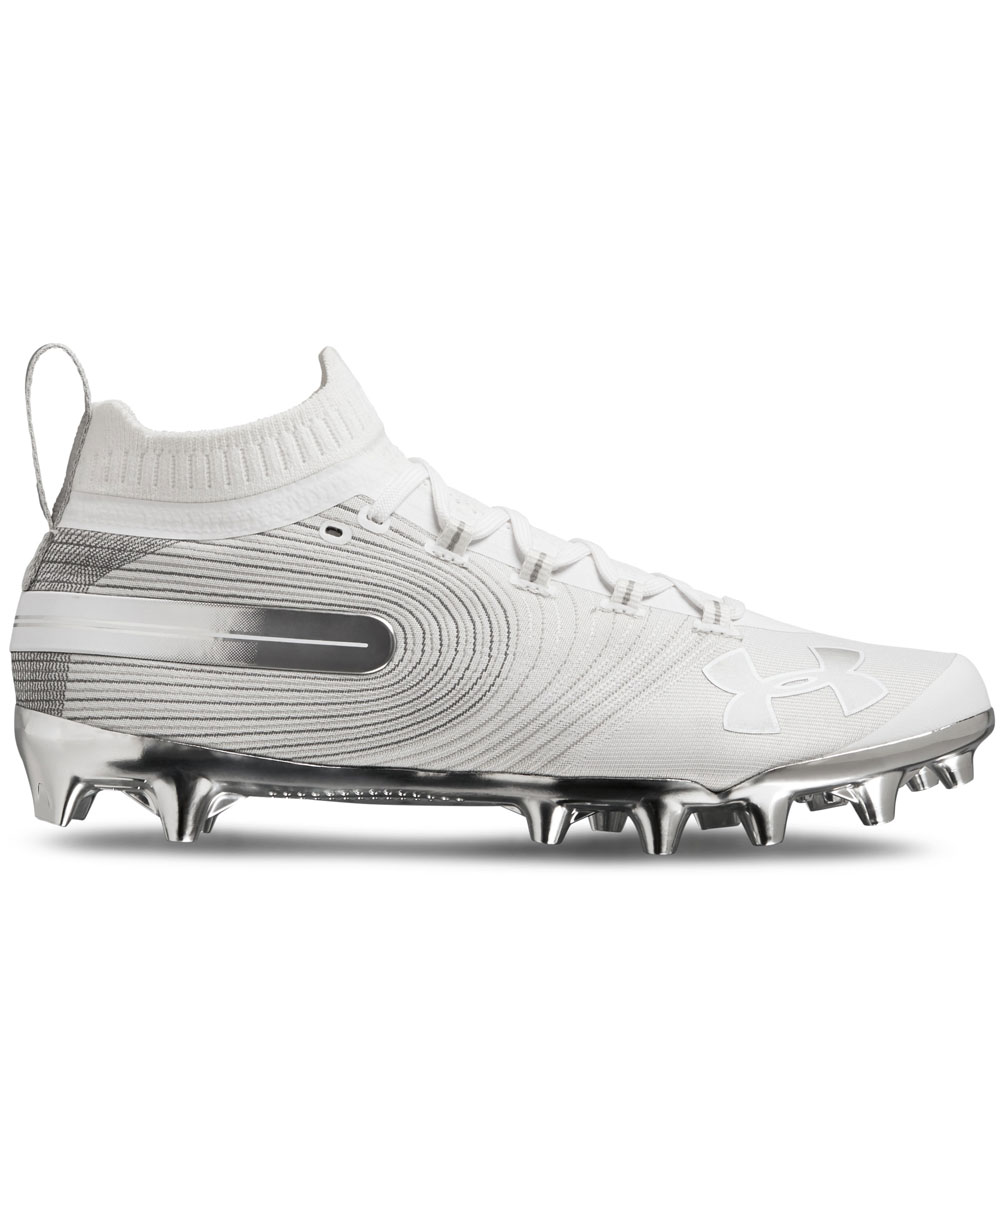 white under armour cleats football